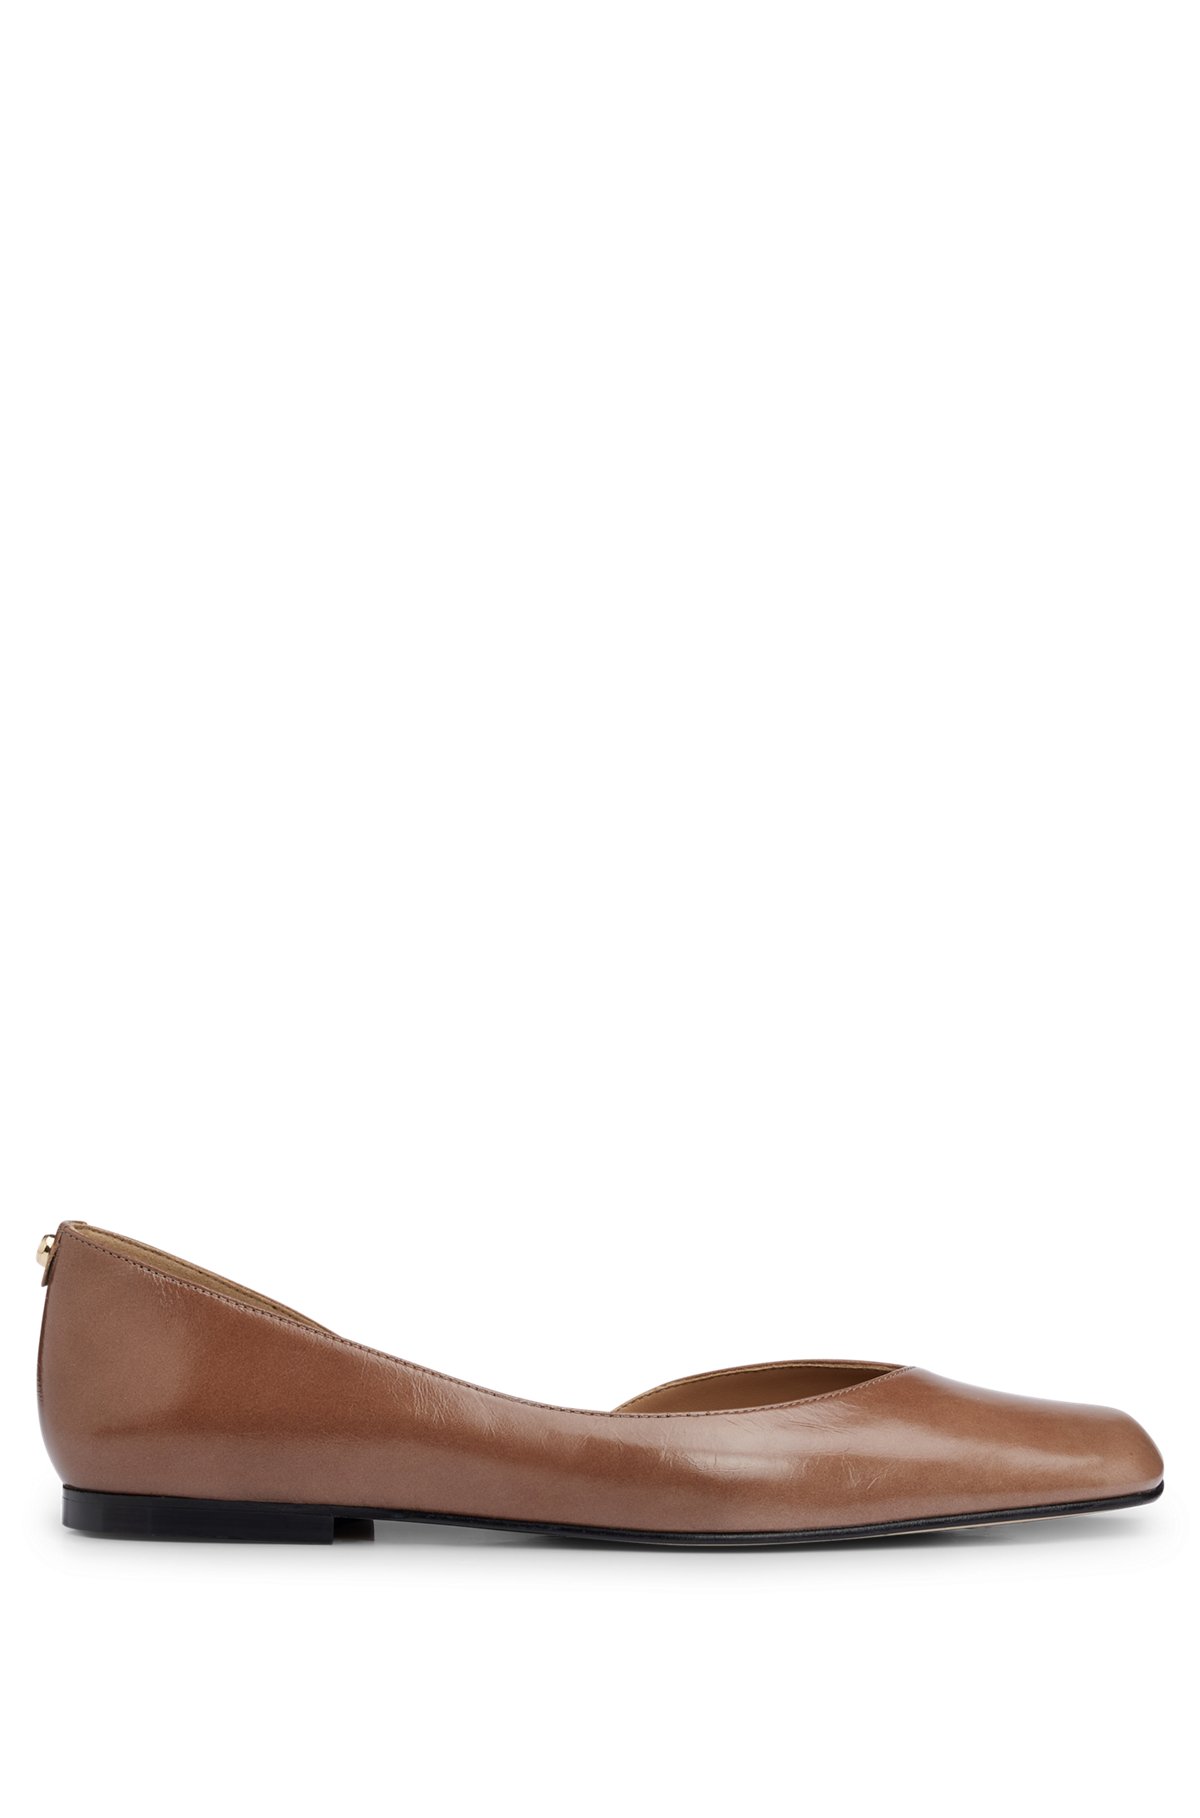 Ballerina flats in leather with asymmetric design, Brown